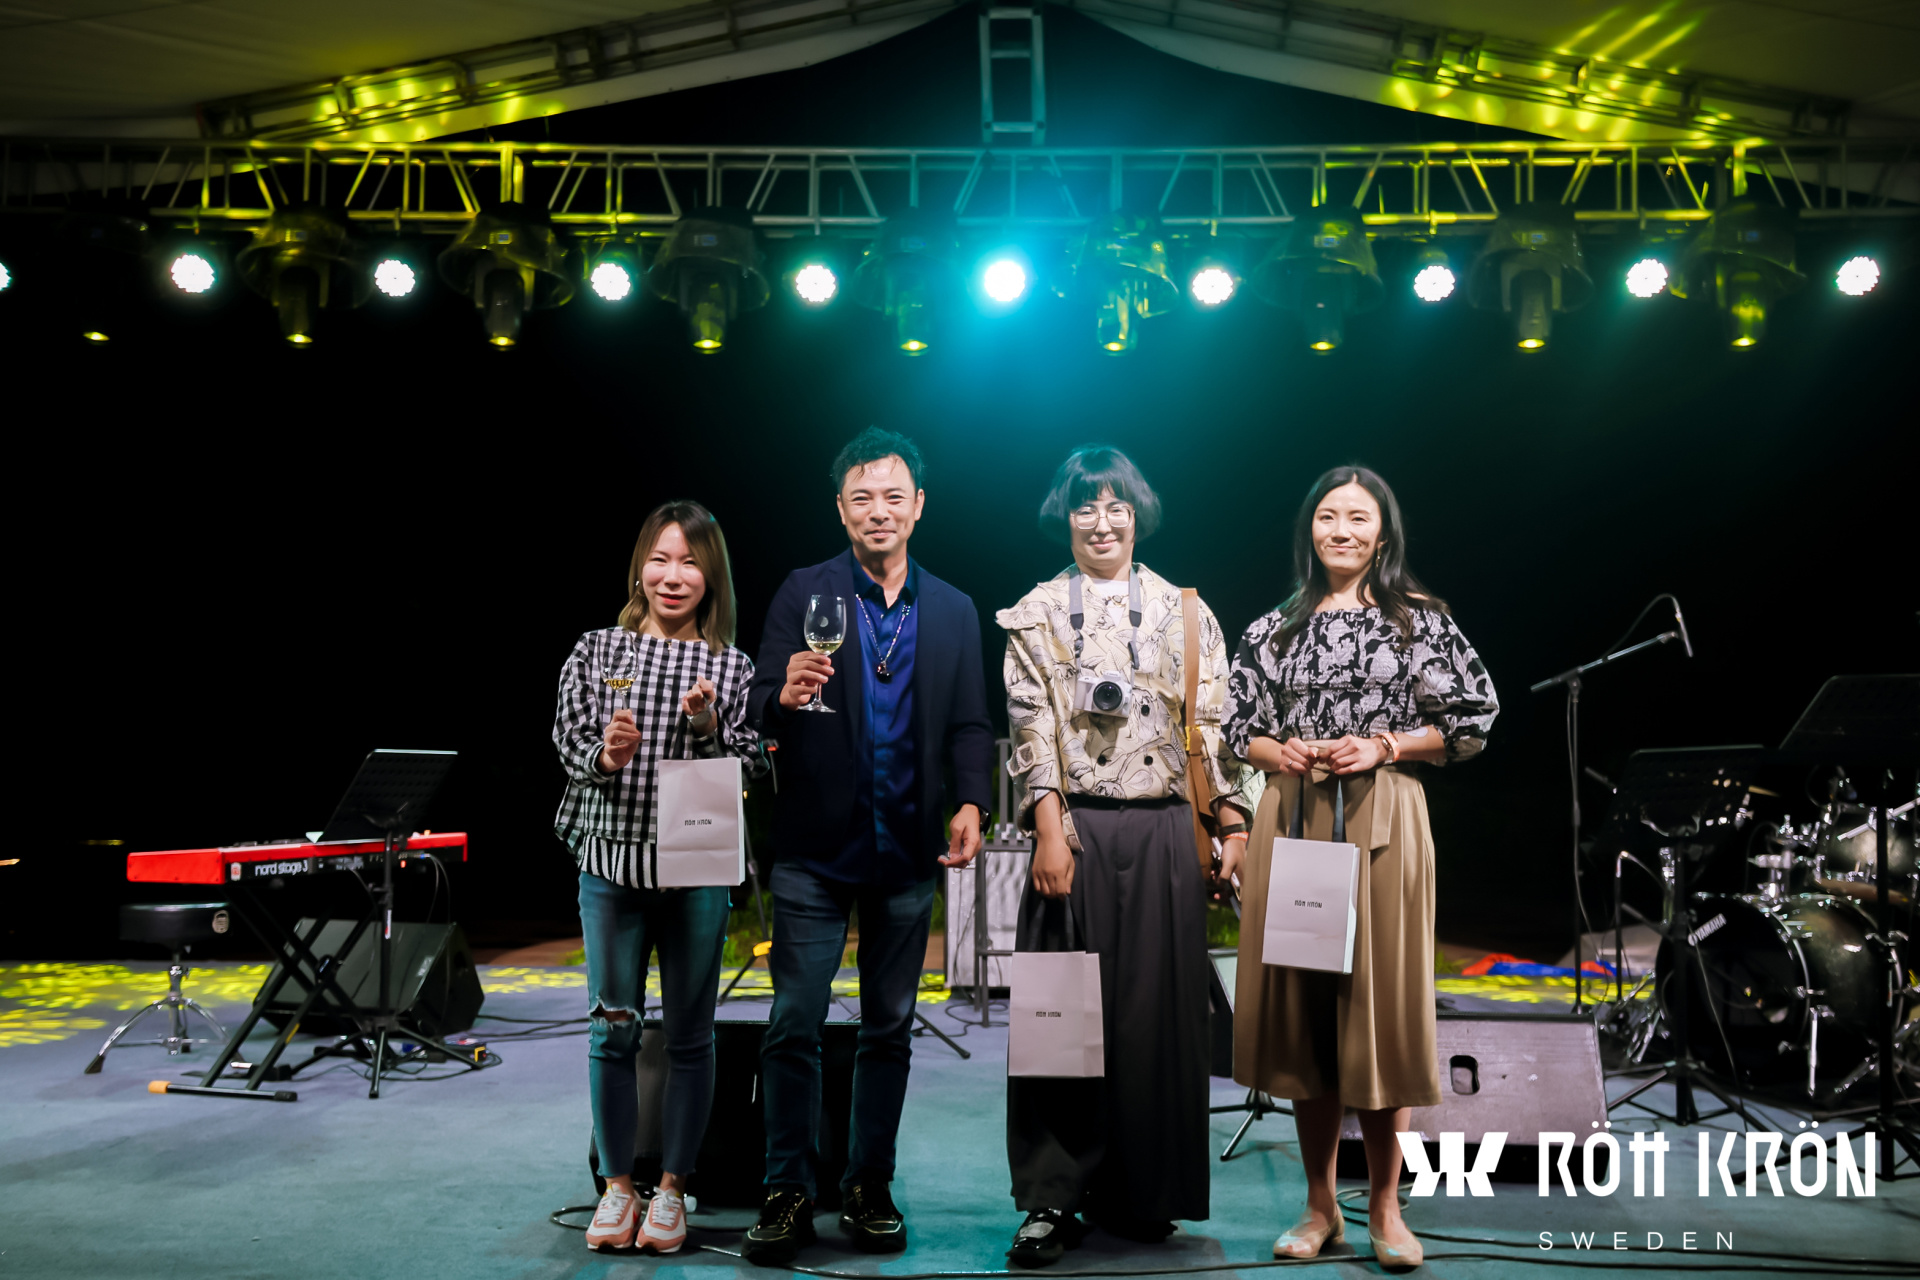 Canaan Wine Industry Joins Hands with ROtt KRON Le Kuang to Start a Wine-Music Tour